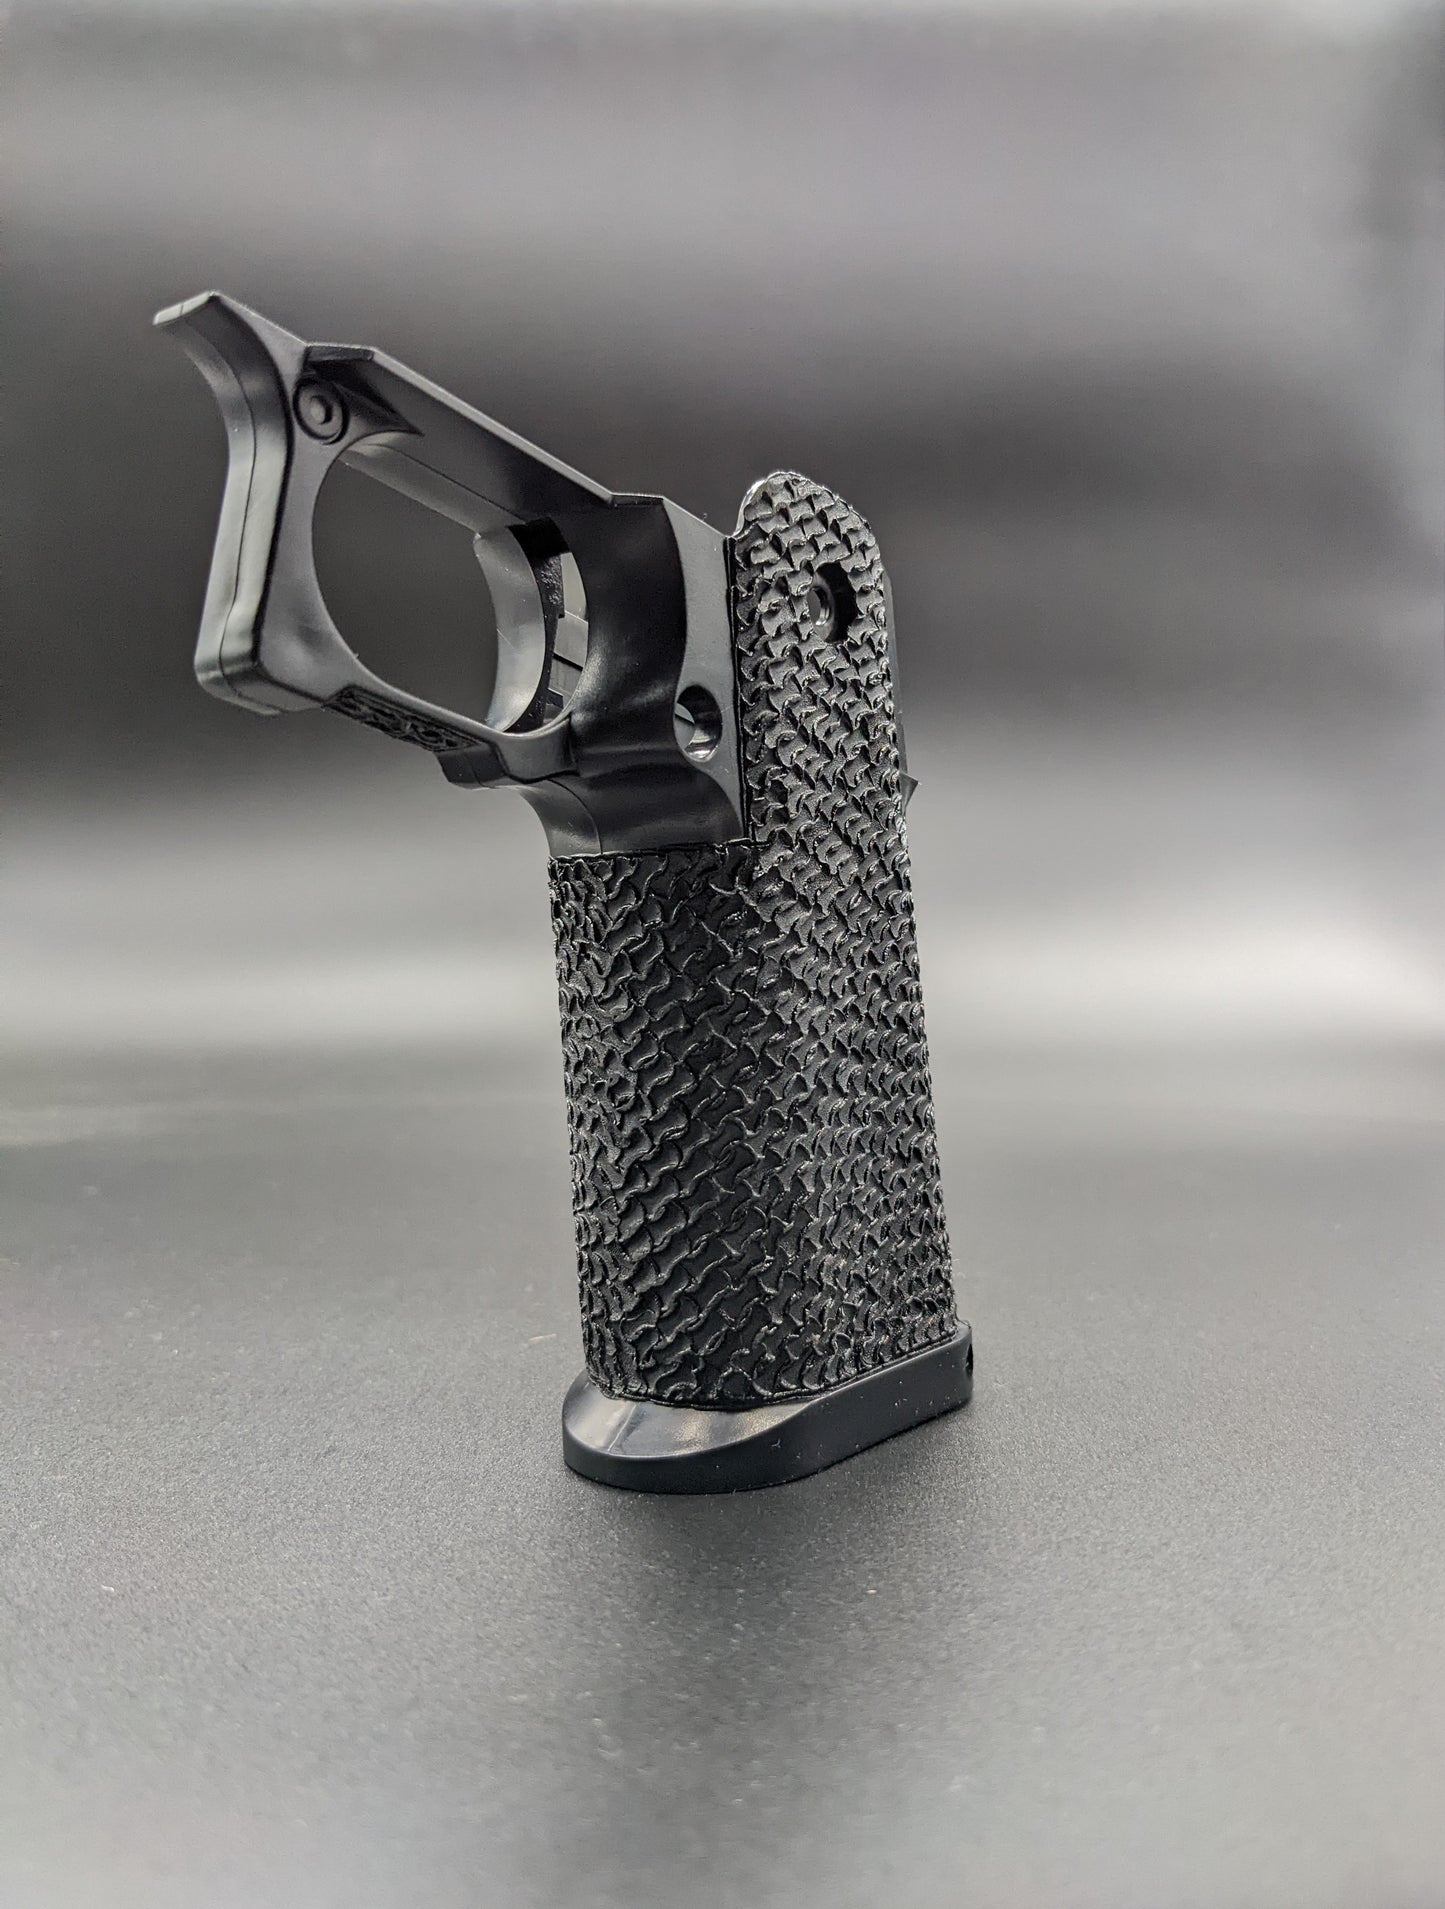 Cow Cow Hi-Capa 4.3/5.1 Stippled Grip - Wave Chaser